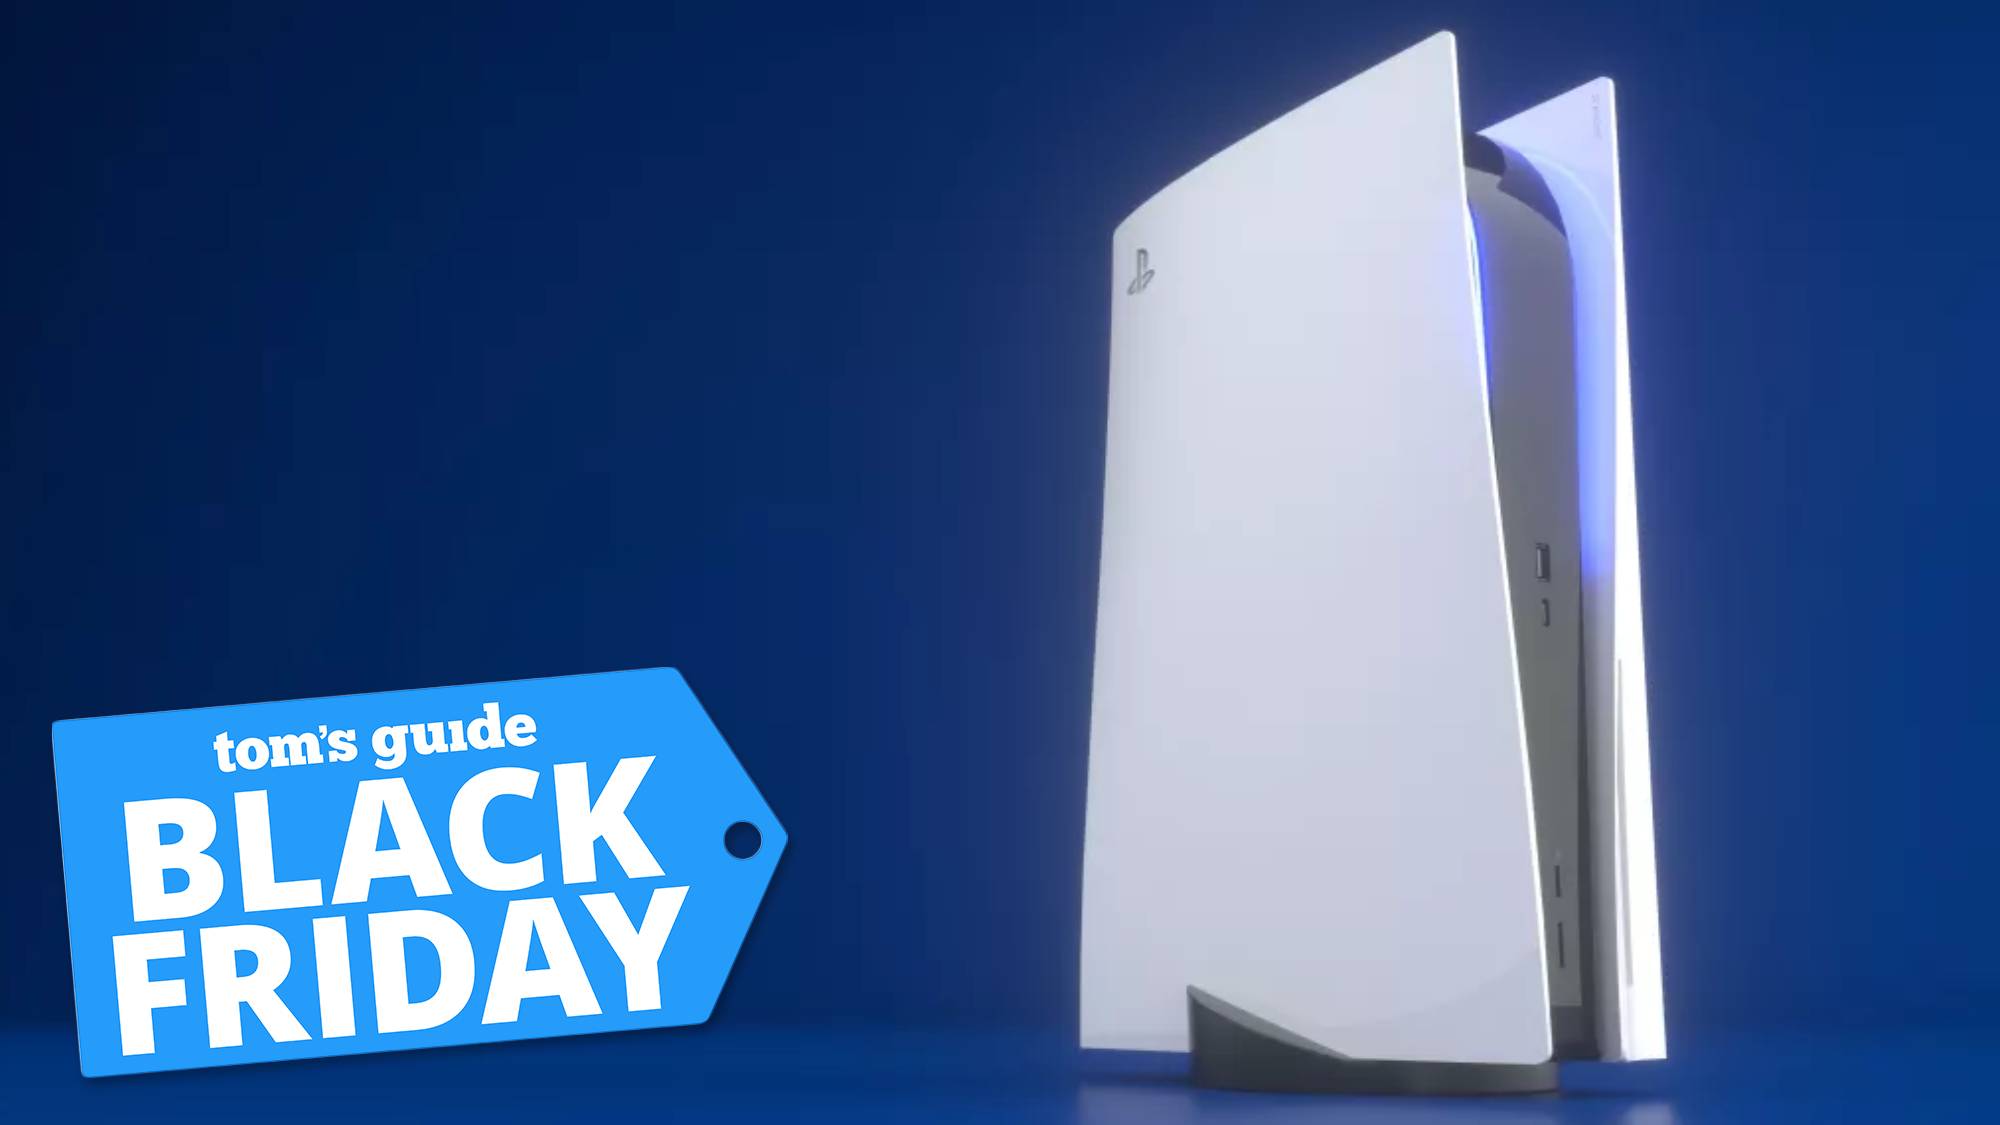 PlayStation on X: Time to talk turkey. Dig in to Black Friday